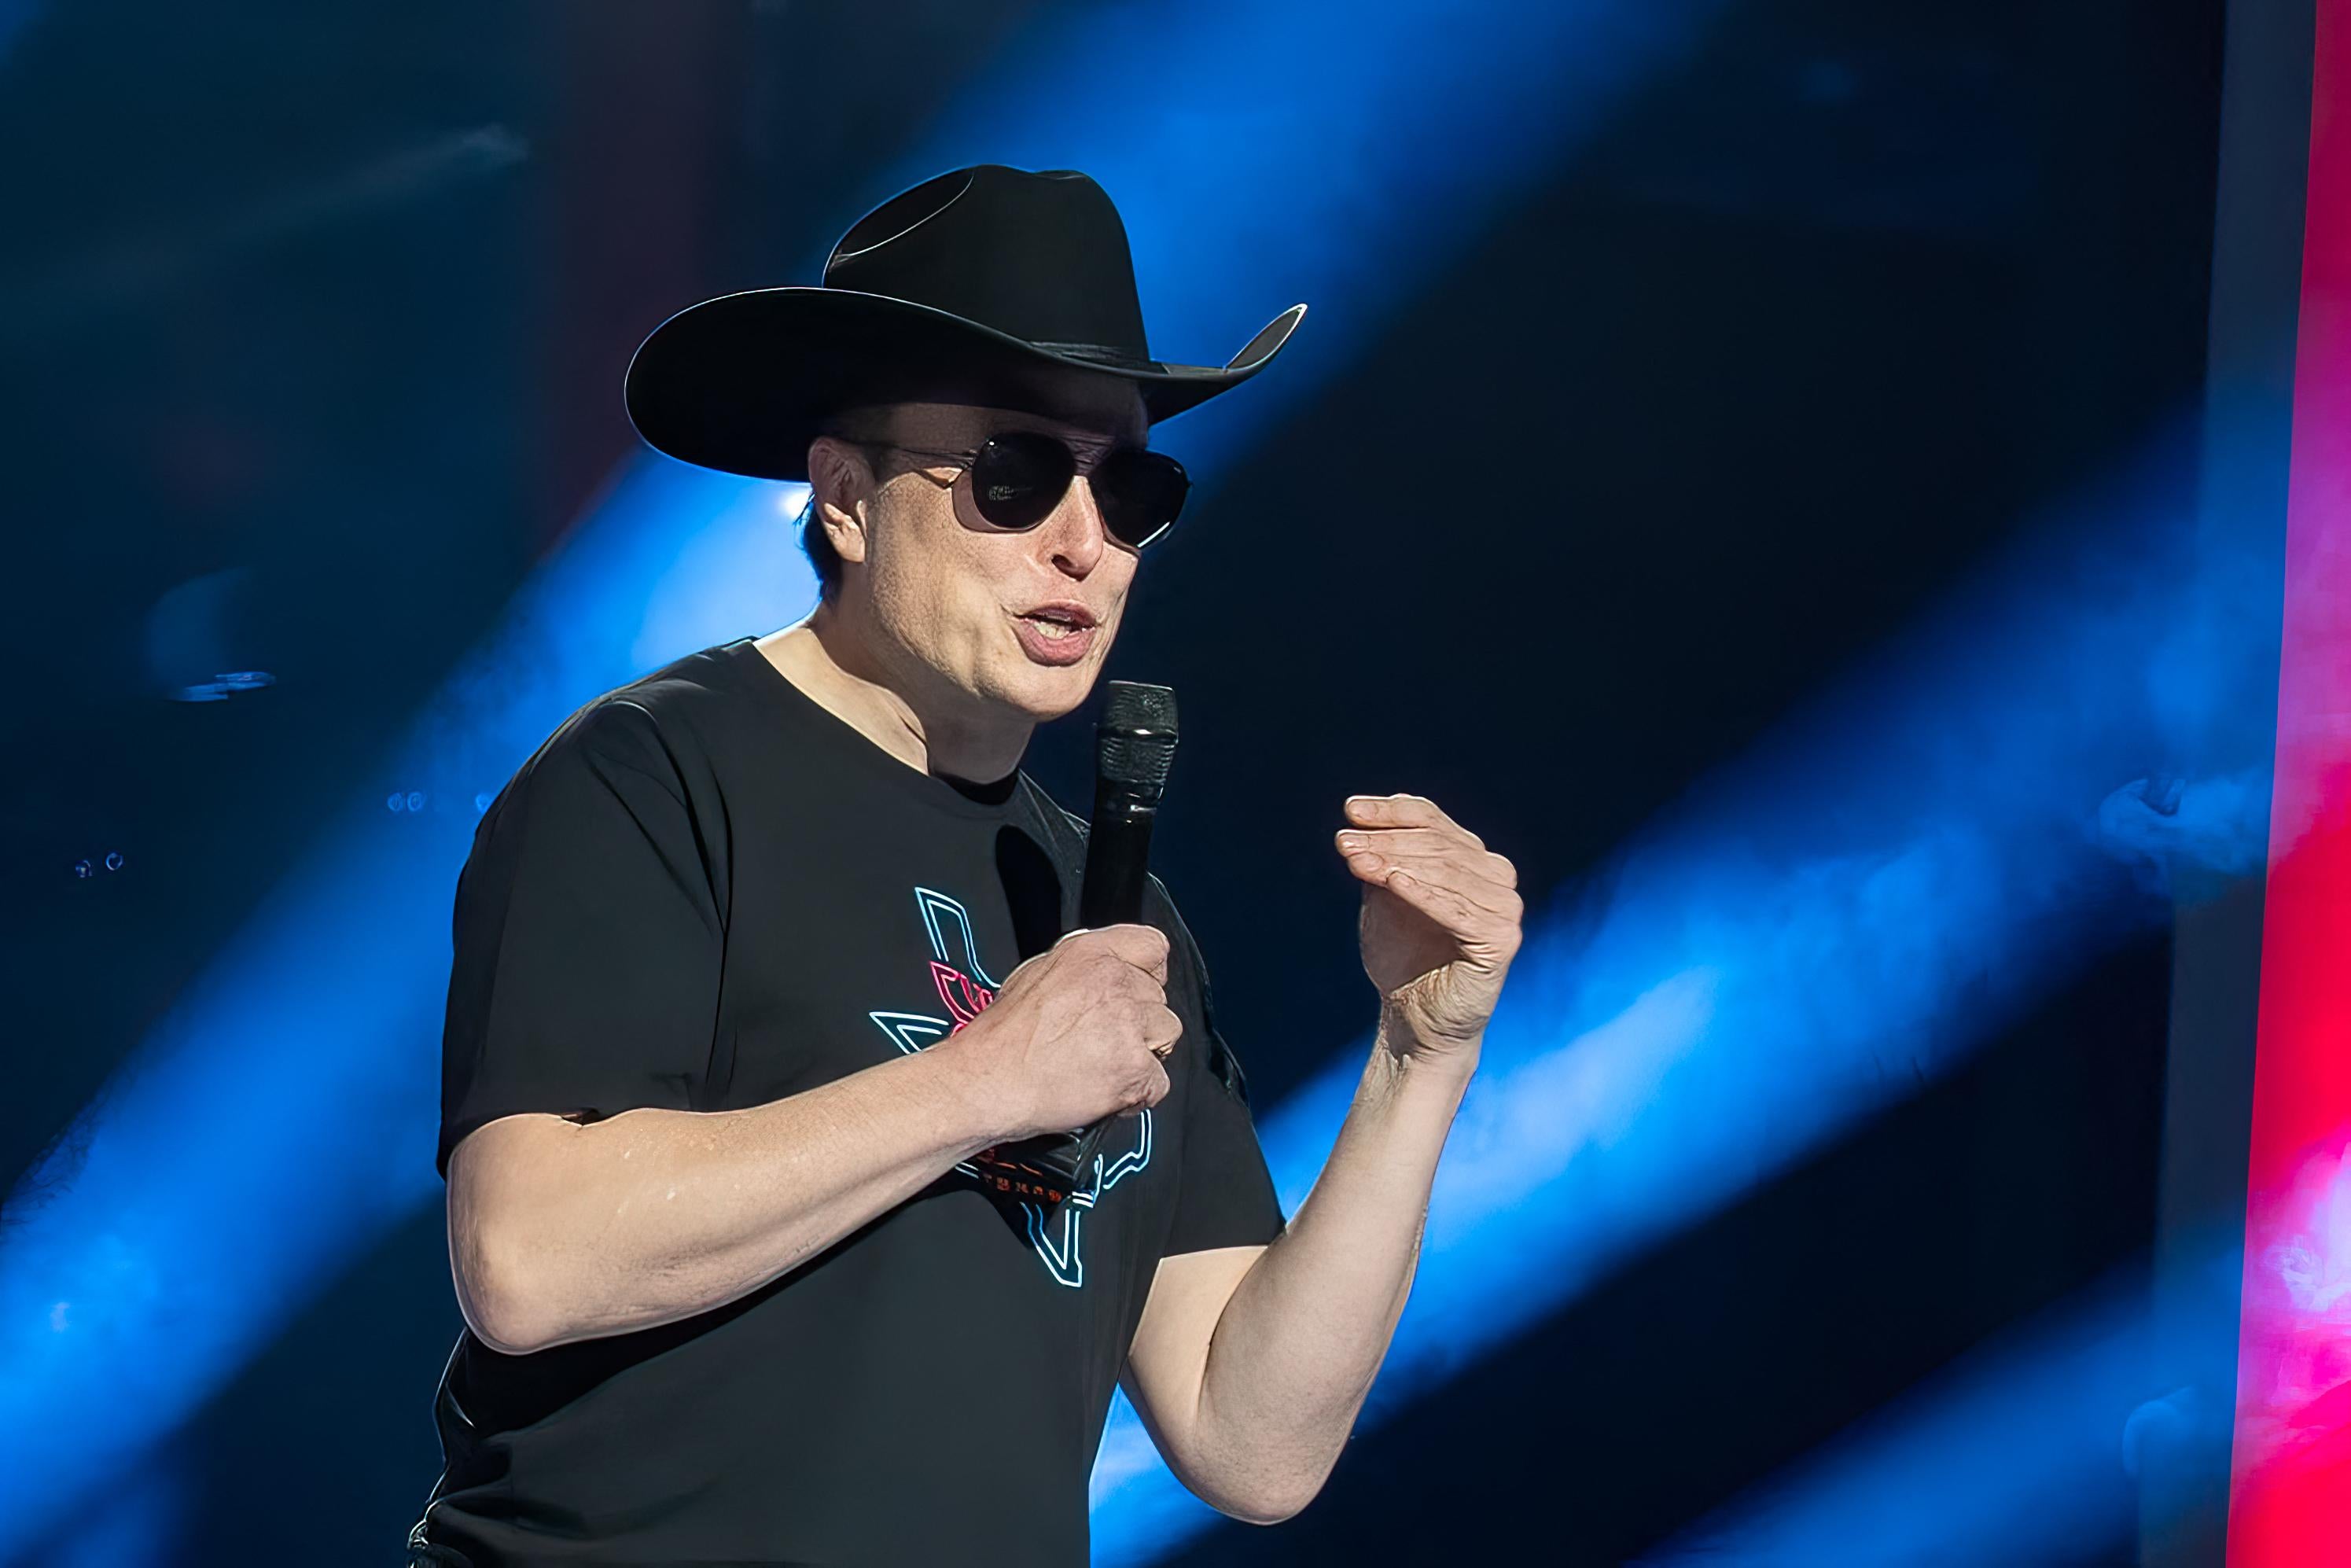 A man wears a cowboy hat and sunglasses while speaking into a handheld mic.